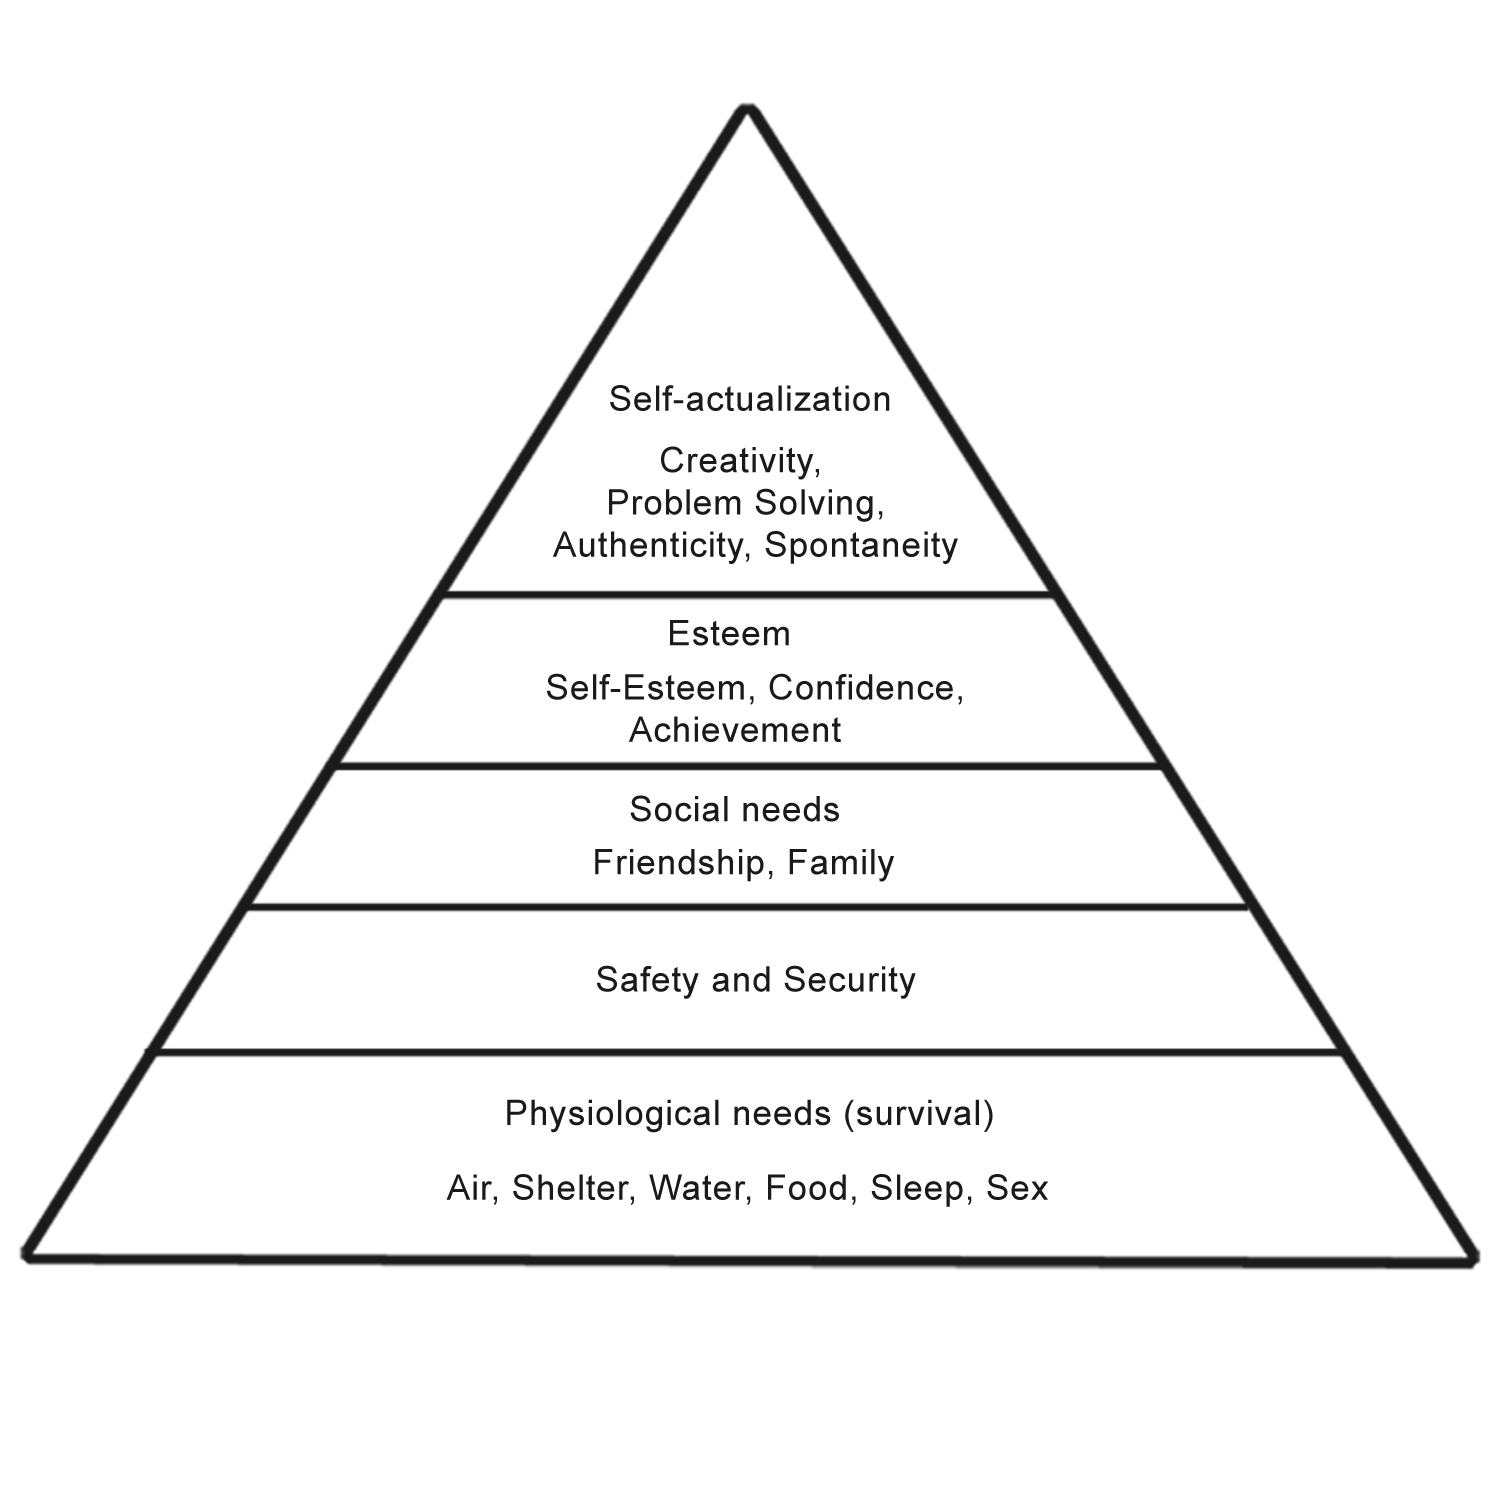 Figure 1 Maslow's hierarchy of needs (Adapted from Maslow 1954